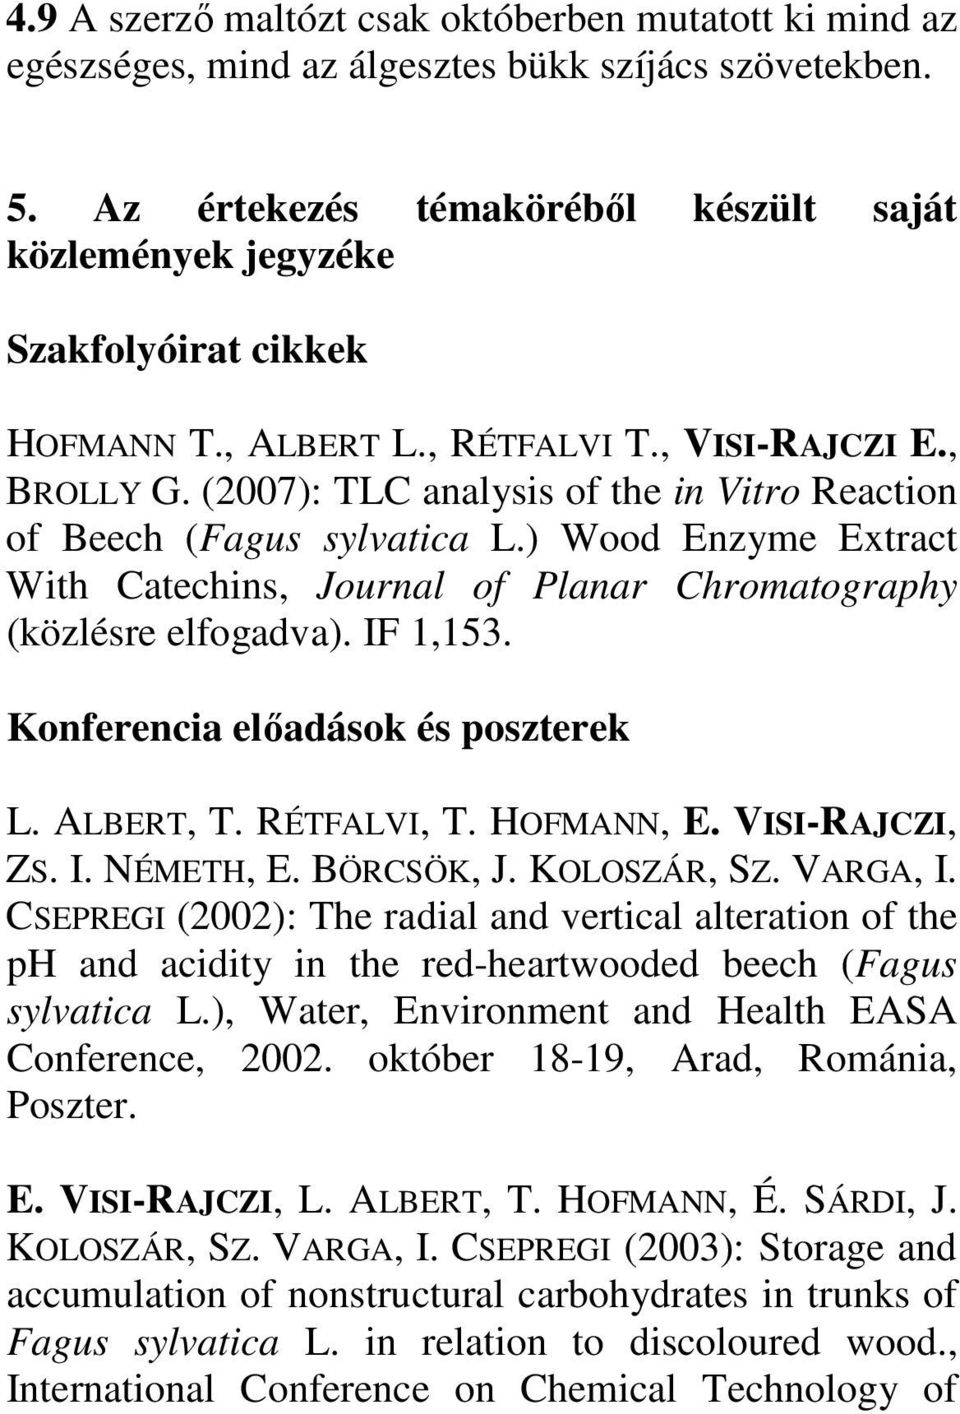 (2007): TLC analysis of the in Vitro Reaction of Beech (Fagus sylvatica L.) Wood Enzyme Extract With Catechins, Journal of Planar Chromatography (közlésre elfogadva). IF 1,153.